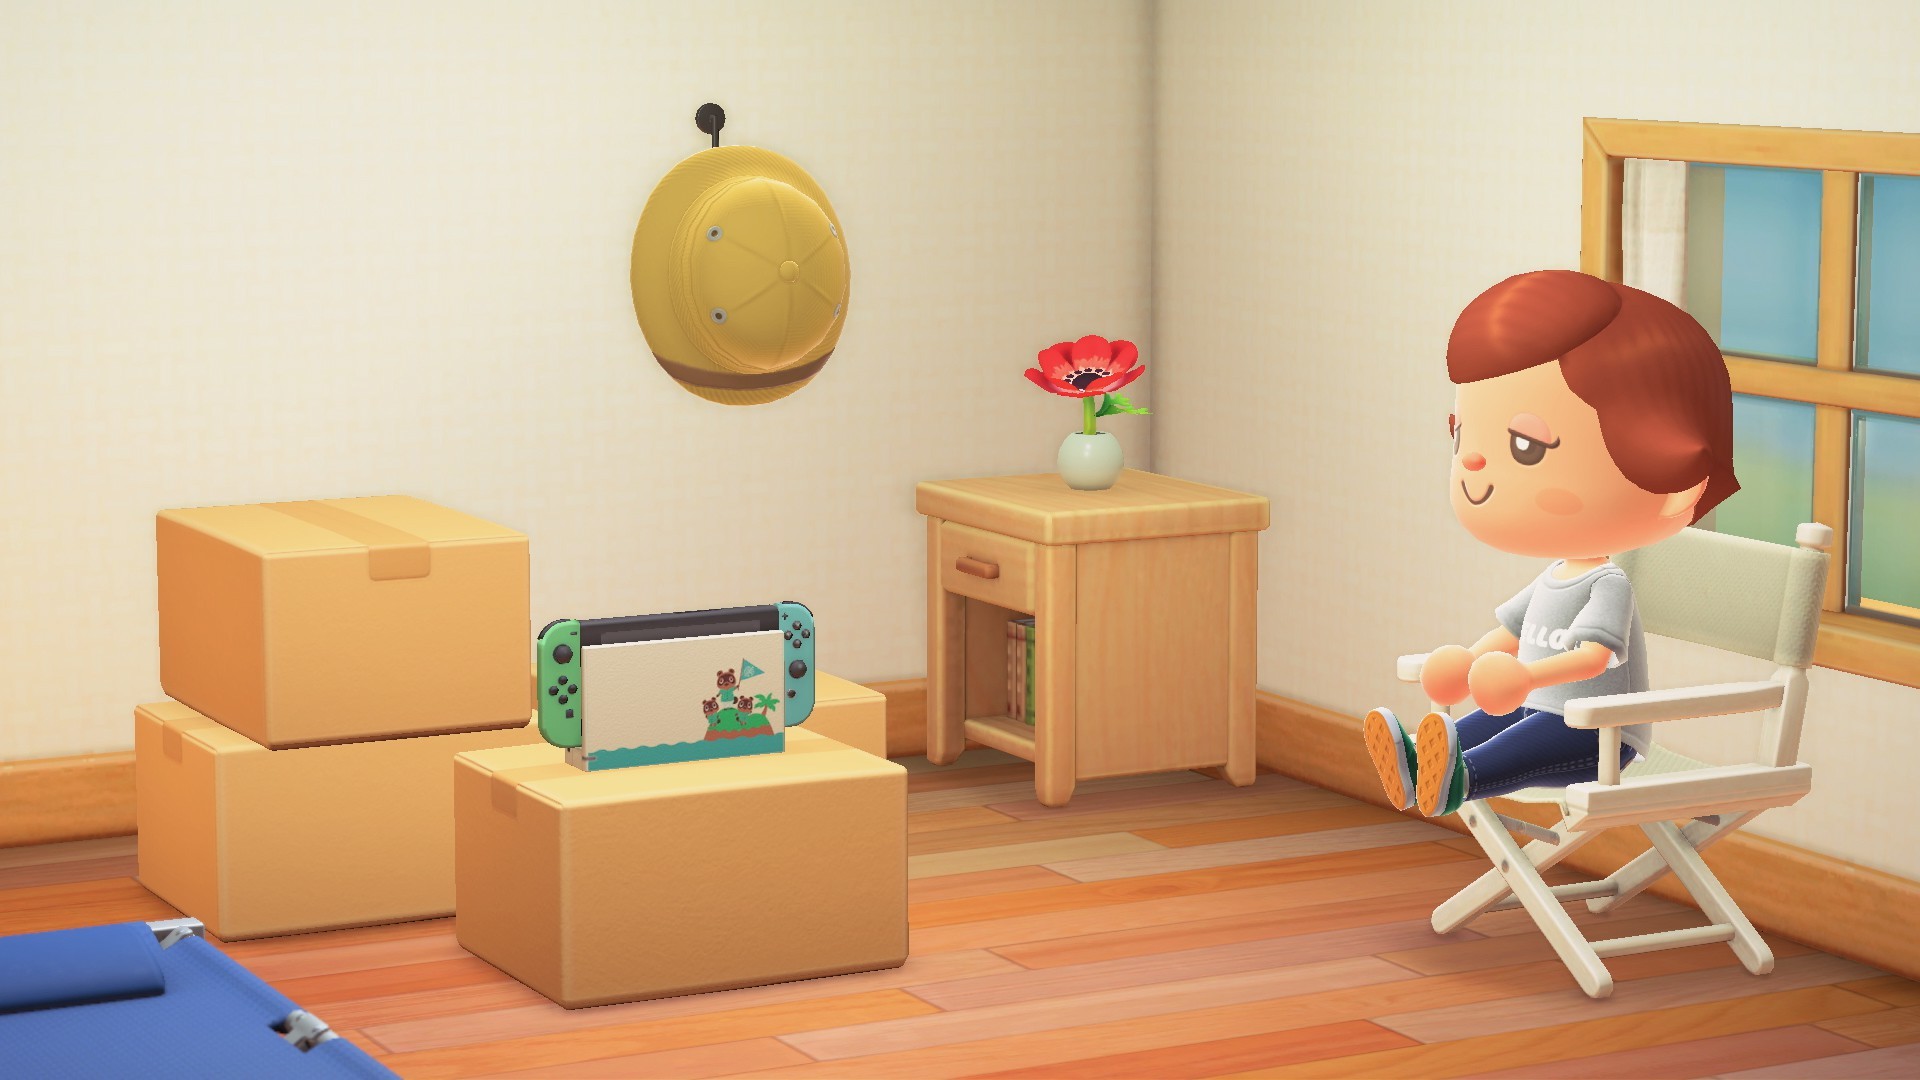 Animal Switch Nintendo Horizons New Update Gives Crossing: GameSpot Virtual You A -